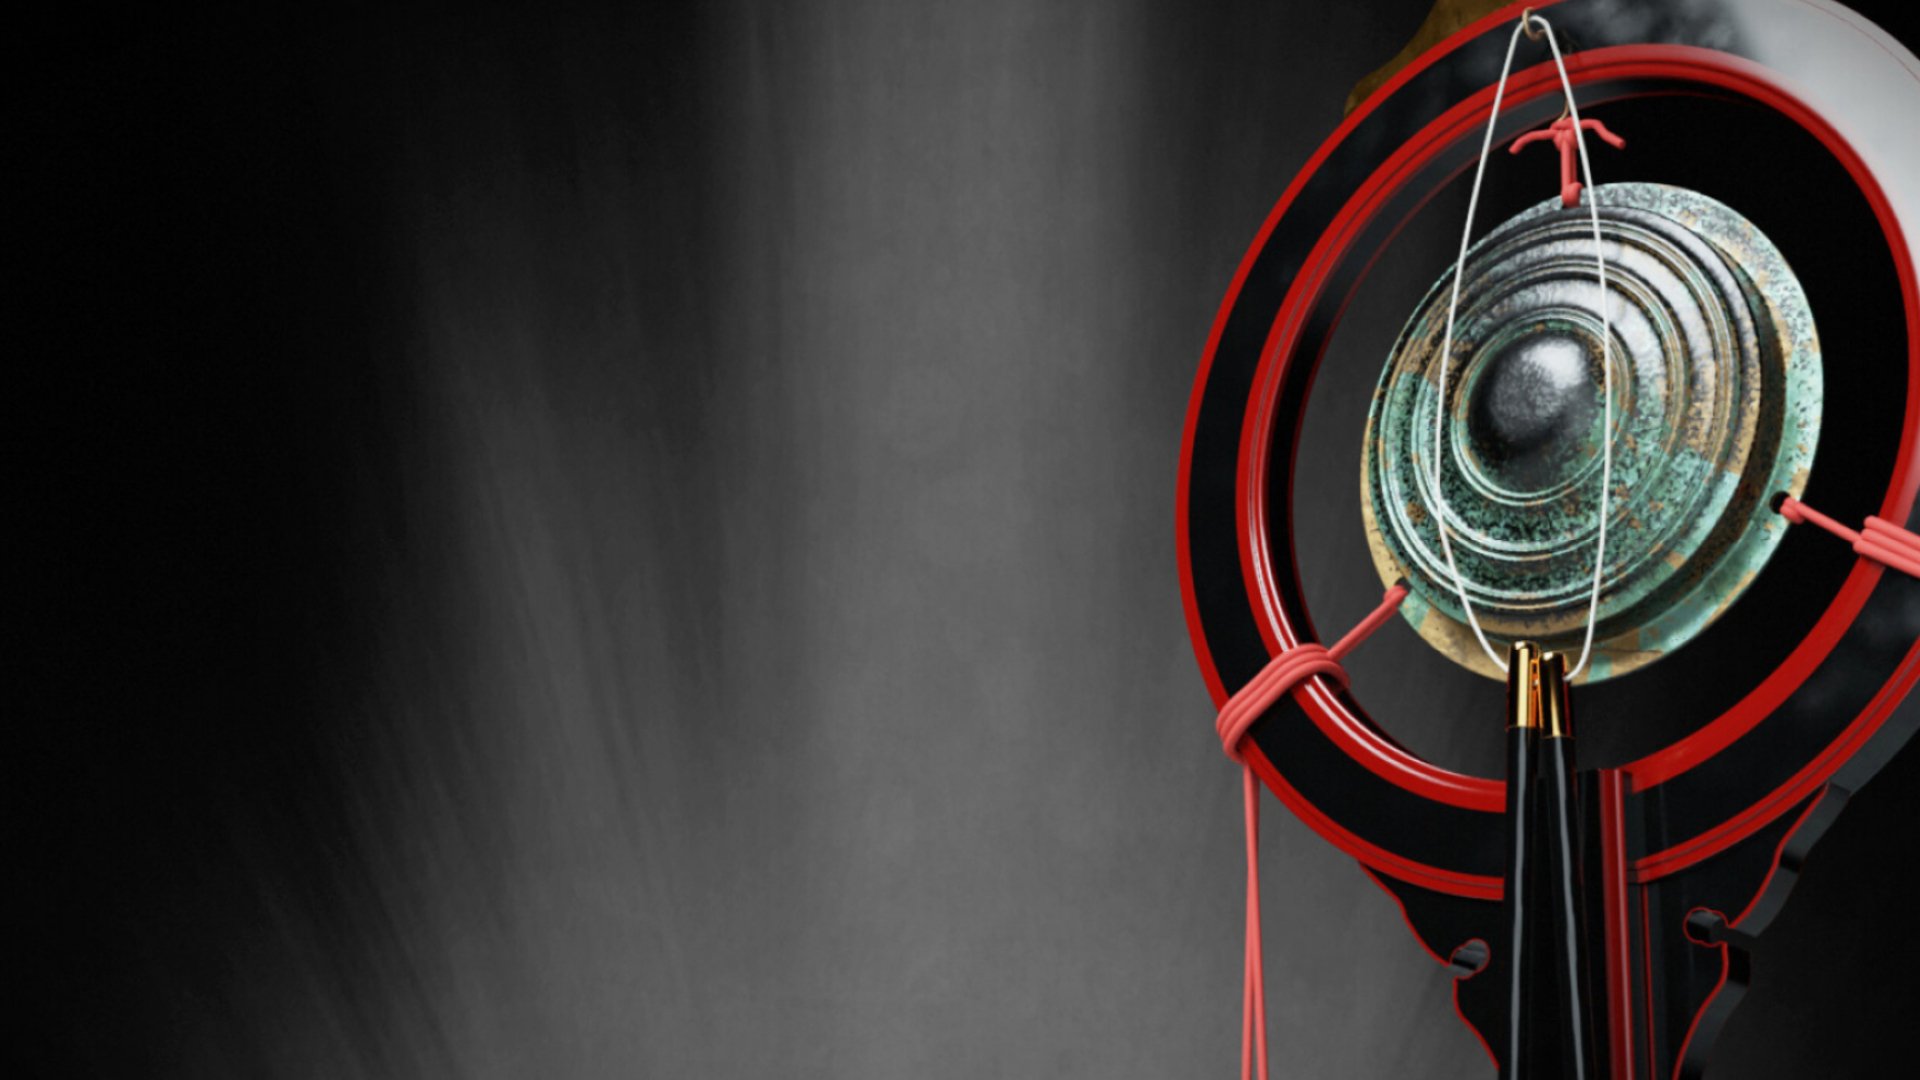 Gong: The Shoko Gong, Used in Japanese gagaku court music, Musical instruments from Japan. 1920x1080 Full HD Wallpaper.